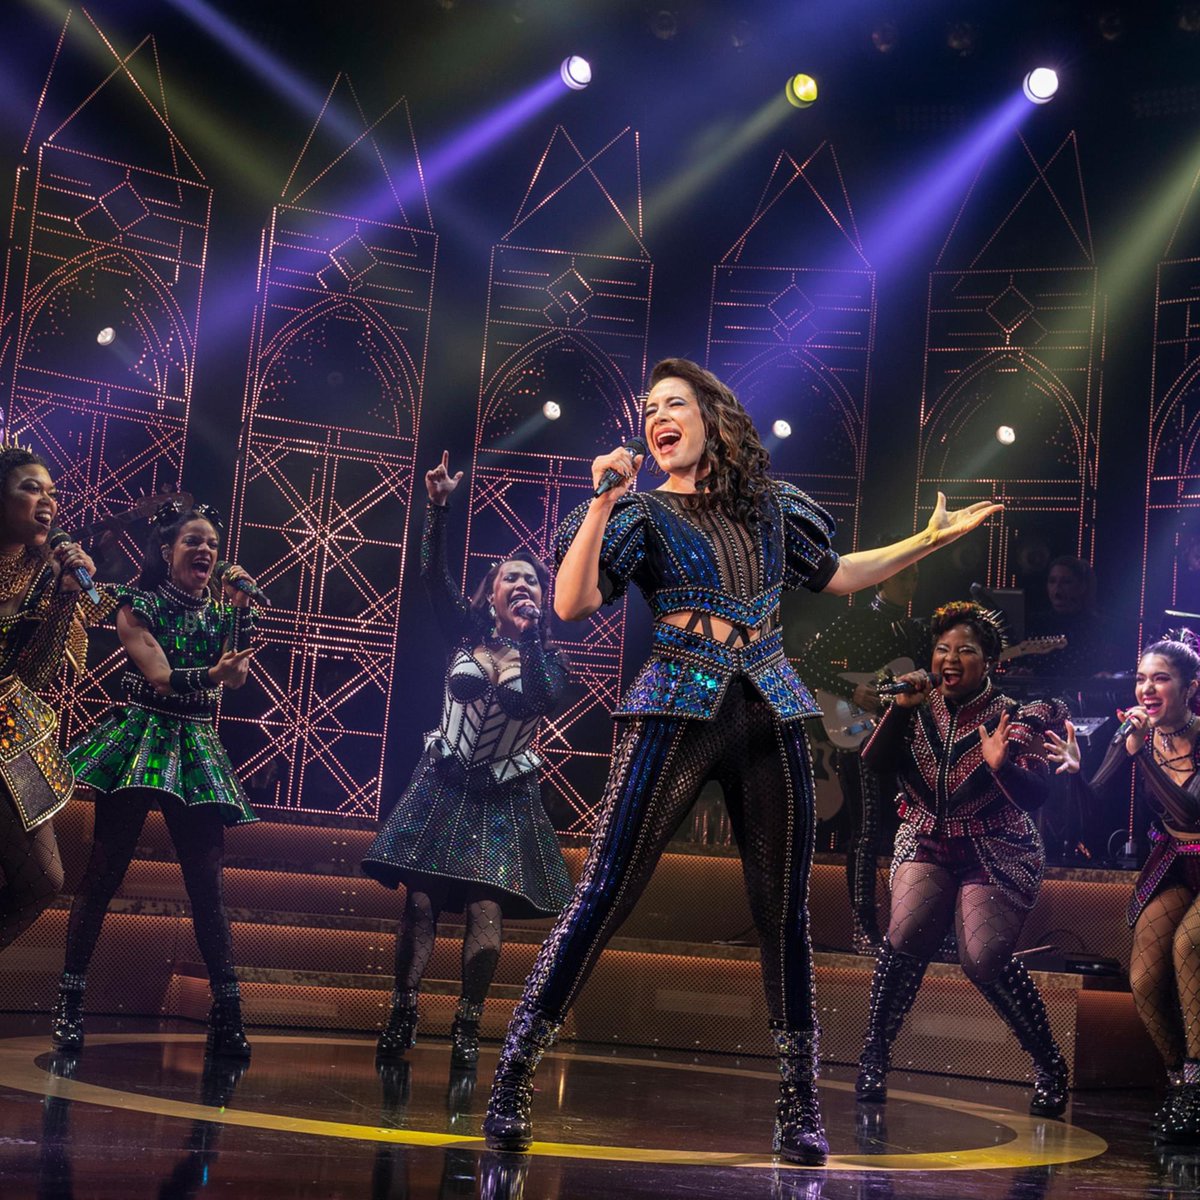 👑 Royal Offer: Save on tix to @SixBroadway! Use code BWYBOX when purchasing tickets at Broadway Direct to get up to 35% off. Valid for select performances through April 6. Visit BroadwayBox.com for more details. 📷: Joan Marcus   #six #sixthemusical #sixbroadway